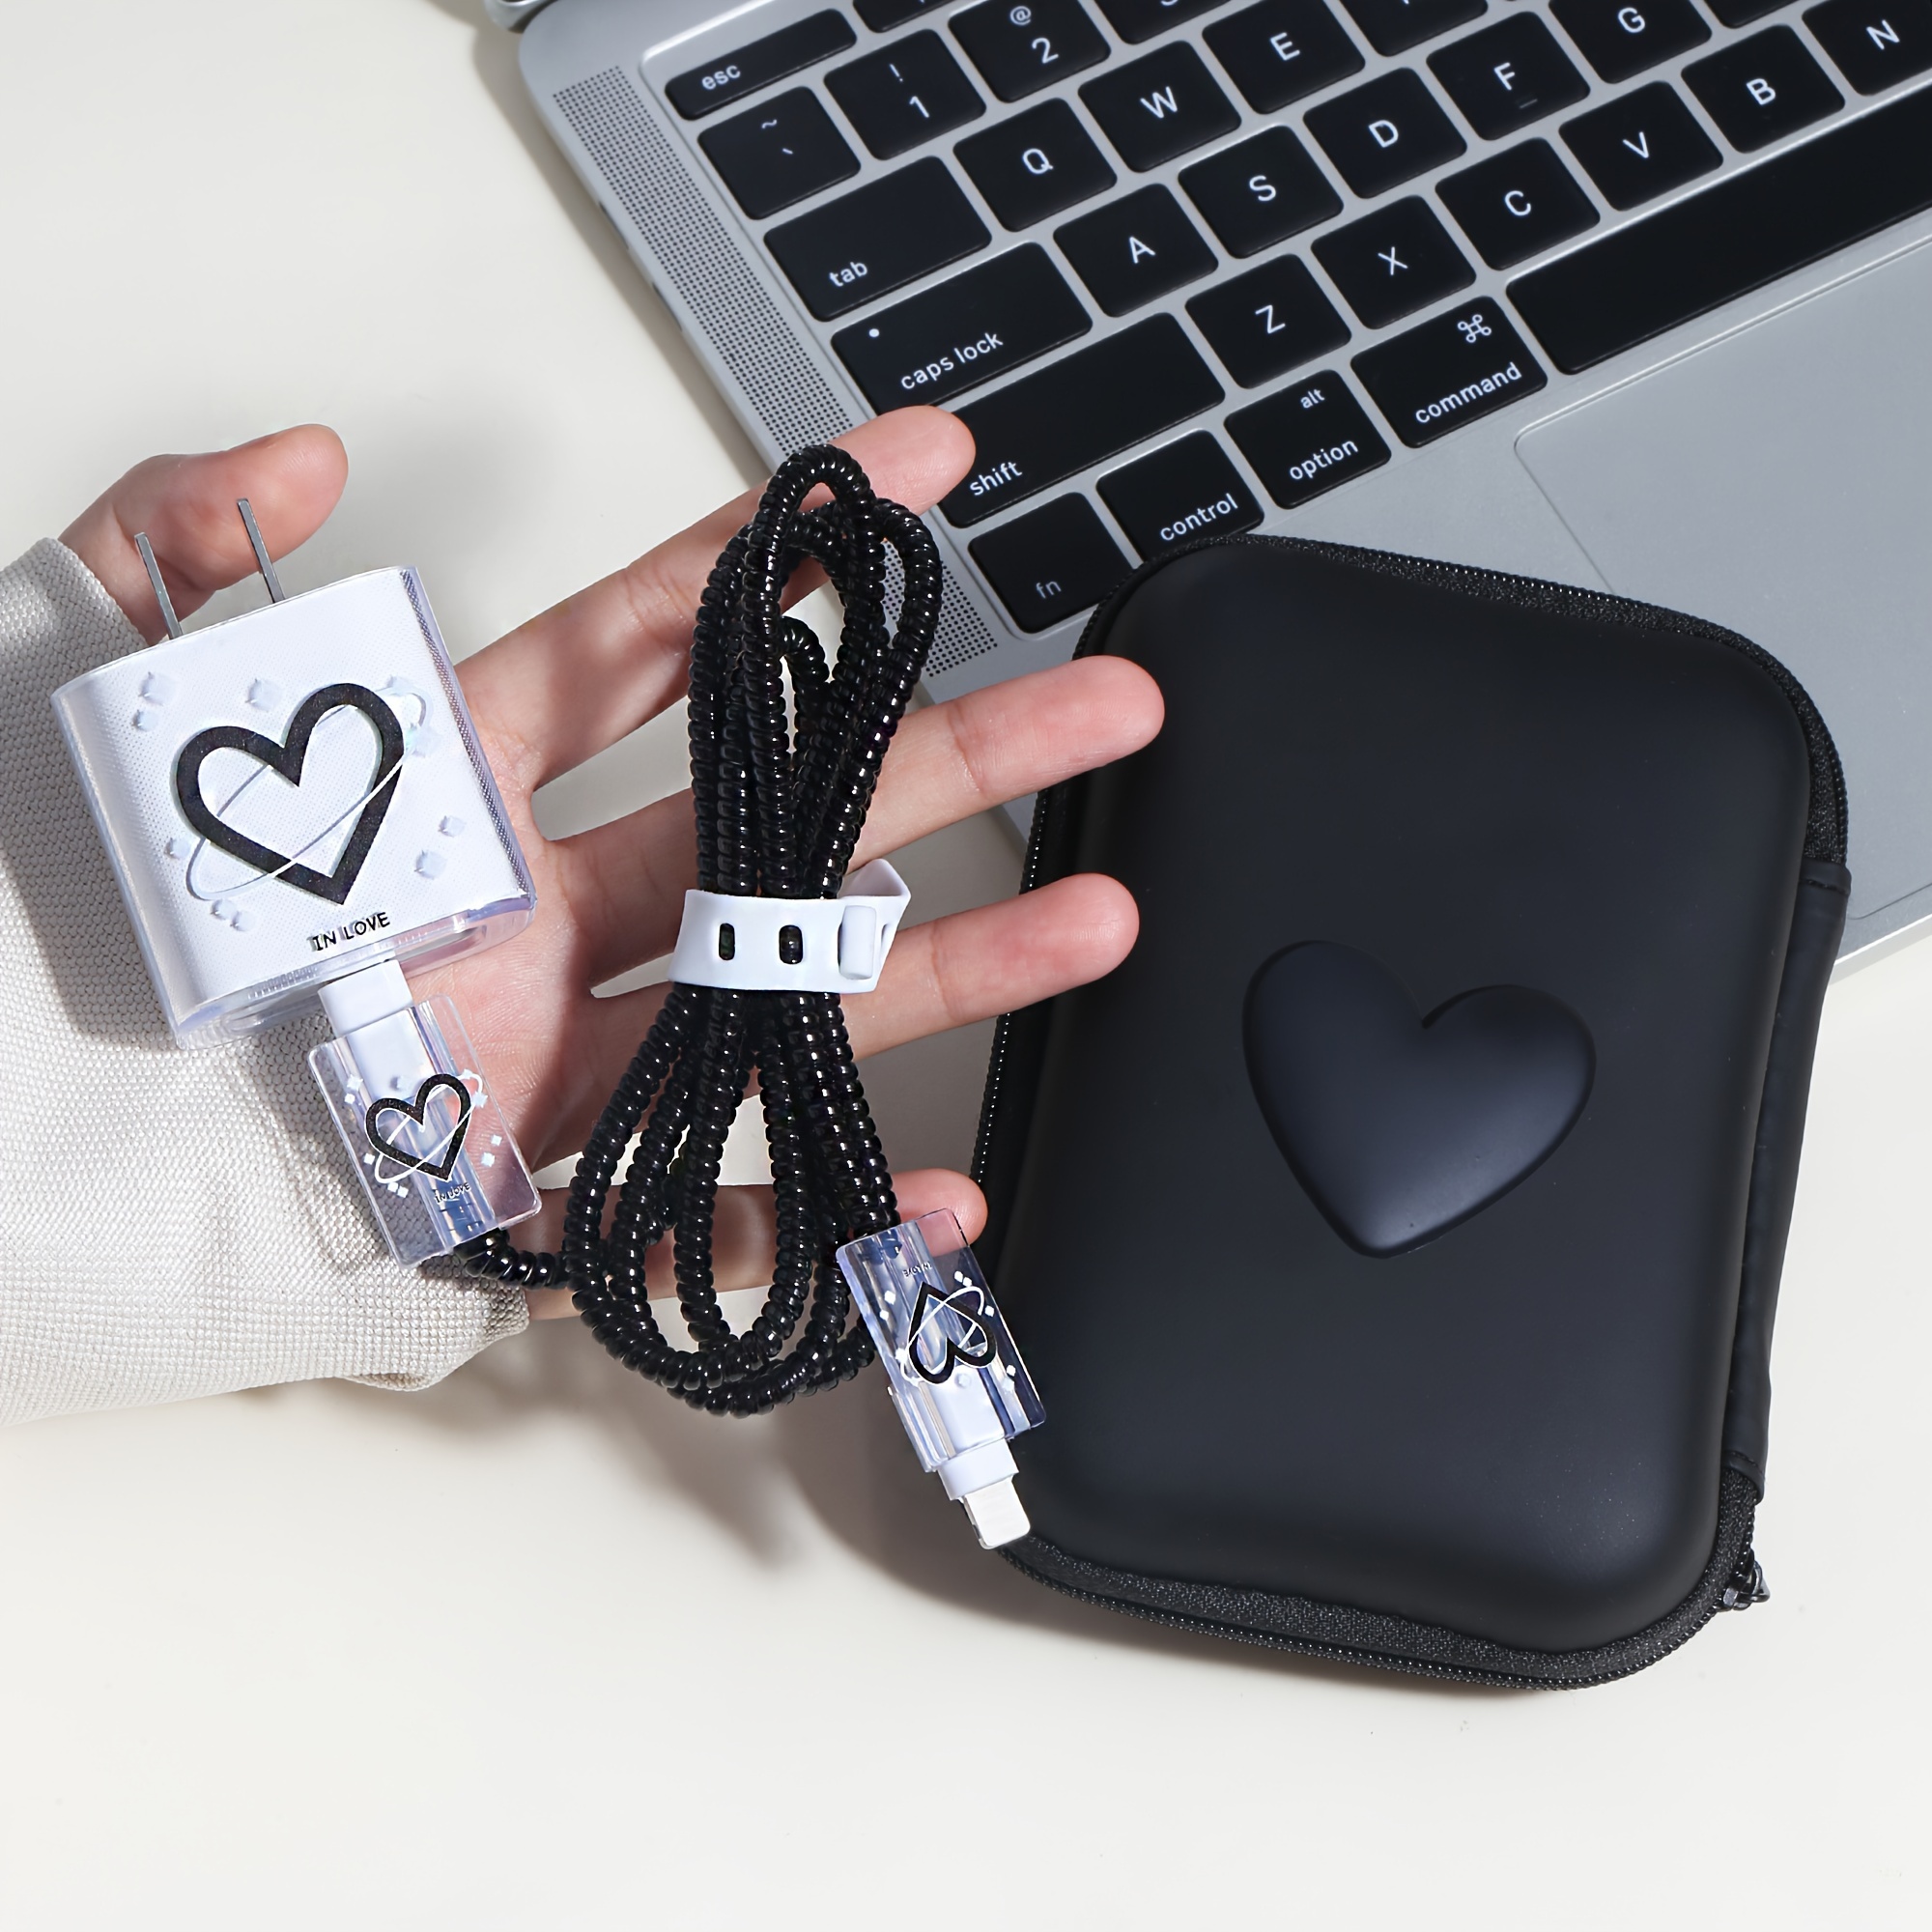 

6-piece Heart-shaped Black Tpu Charger Set With Eva Protective Case, Data Cable & Earphones For Iphone - Compatible With 18w/20w Fast Charging